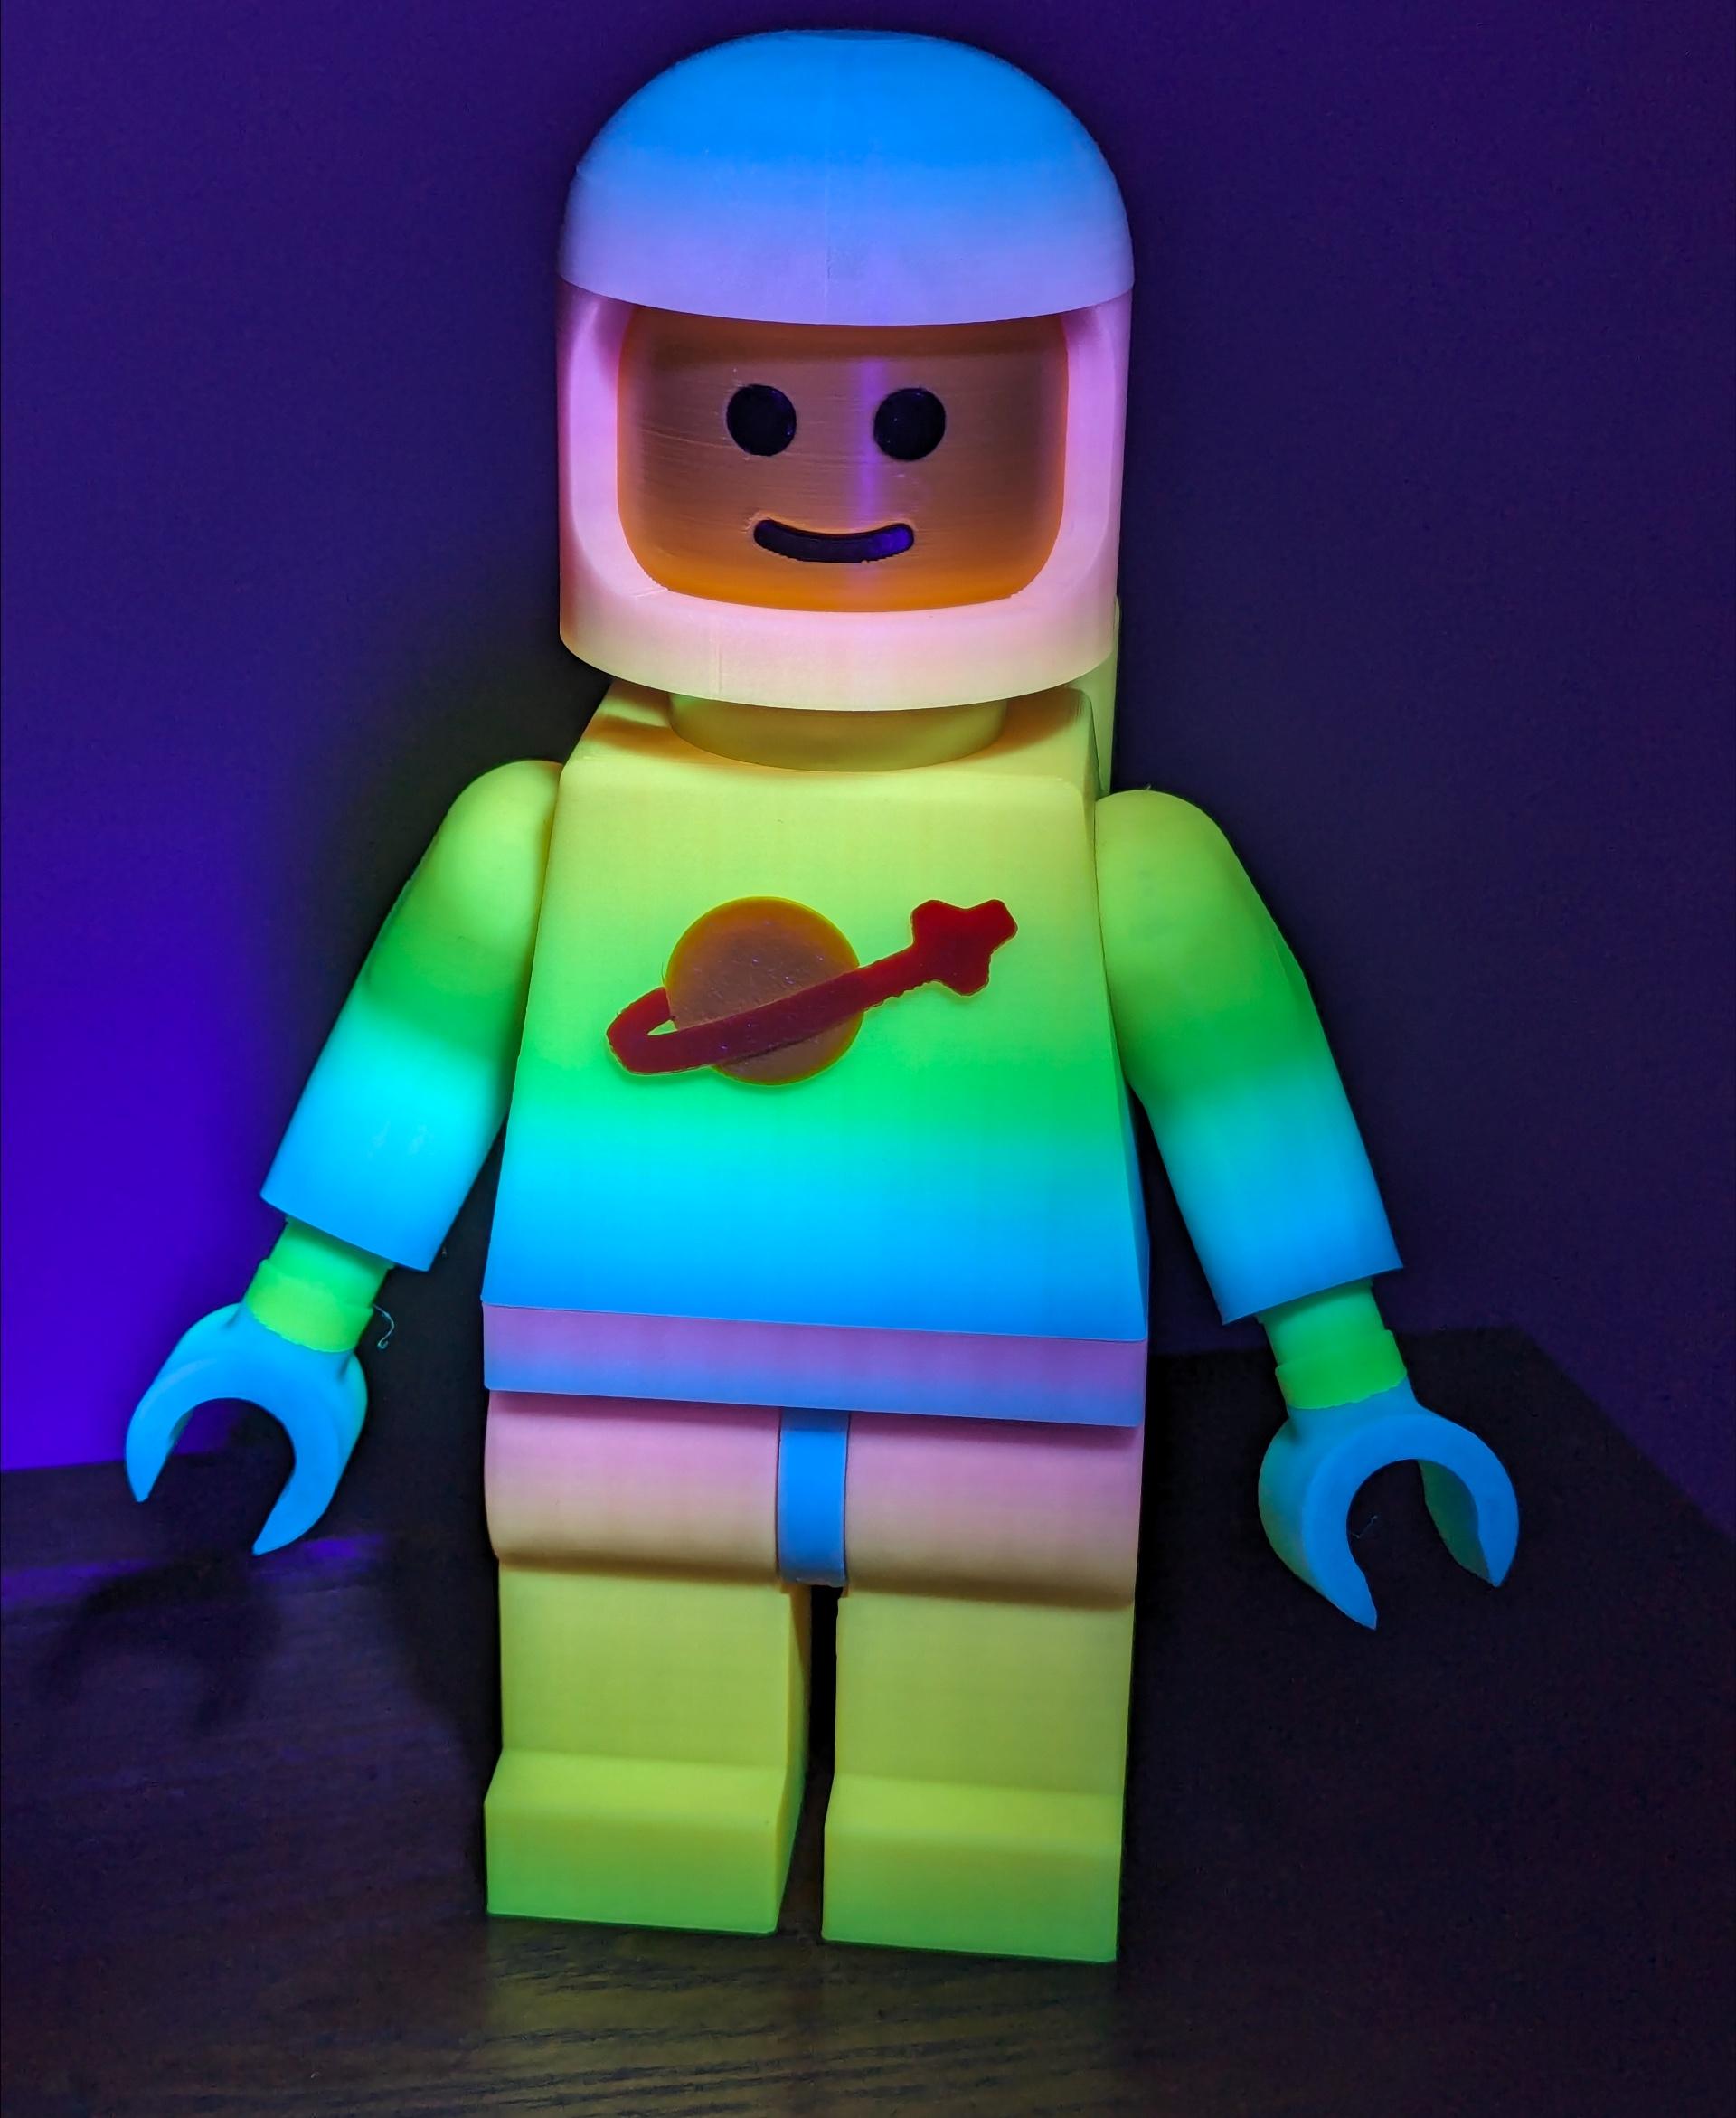 Classic Spaceman (6:1 LEGO-inspired brick figure, NO MMU/AMS, NO supports, NO glue) - Printed in
- Polymaker_3D PolyLite Luminous Rainbow, Red, and Black
- Coex3D Taxicab Yellow - 3d model